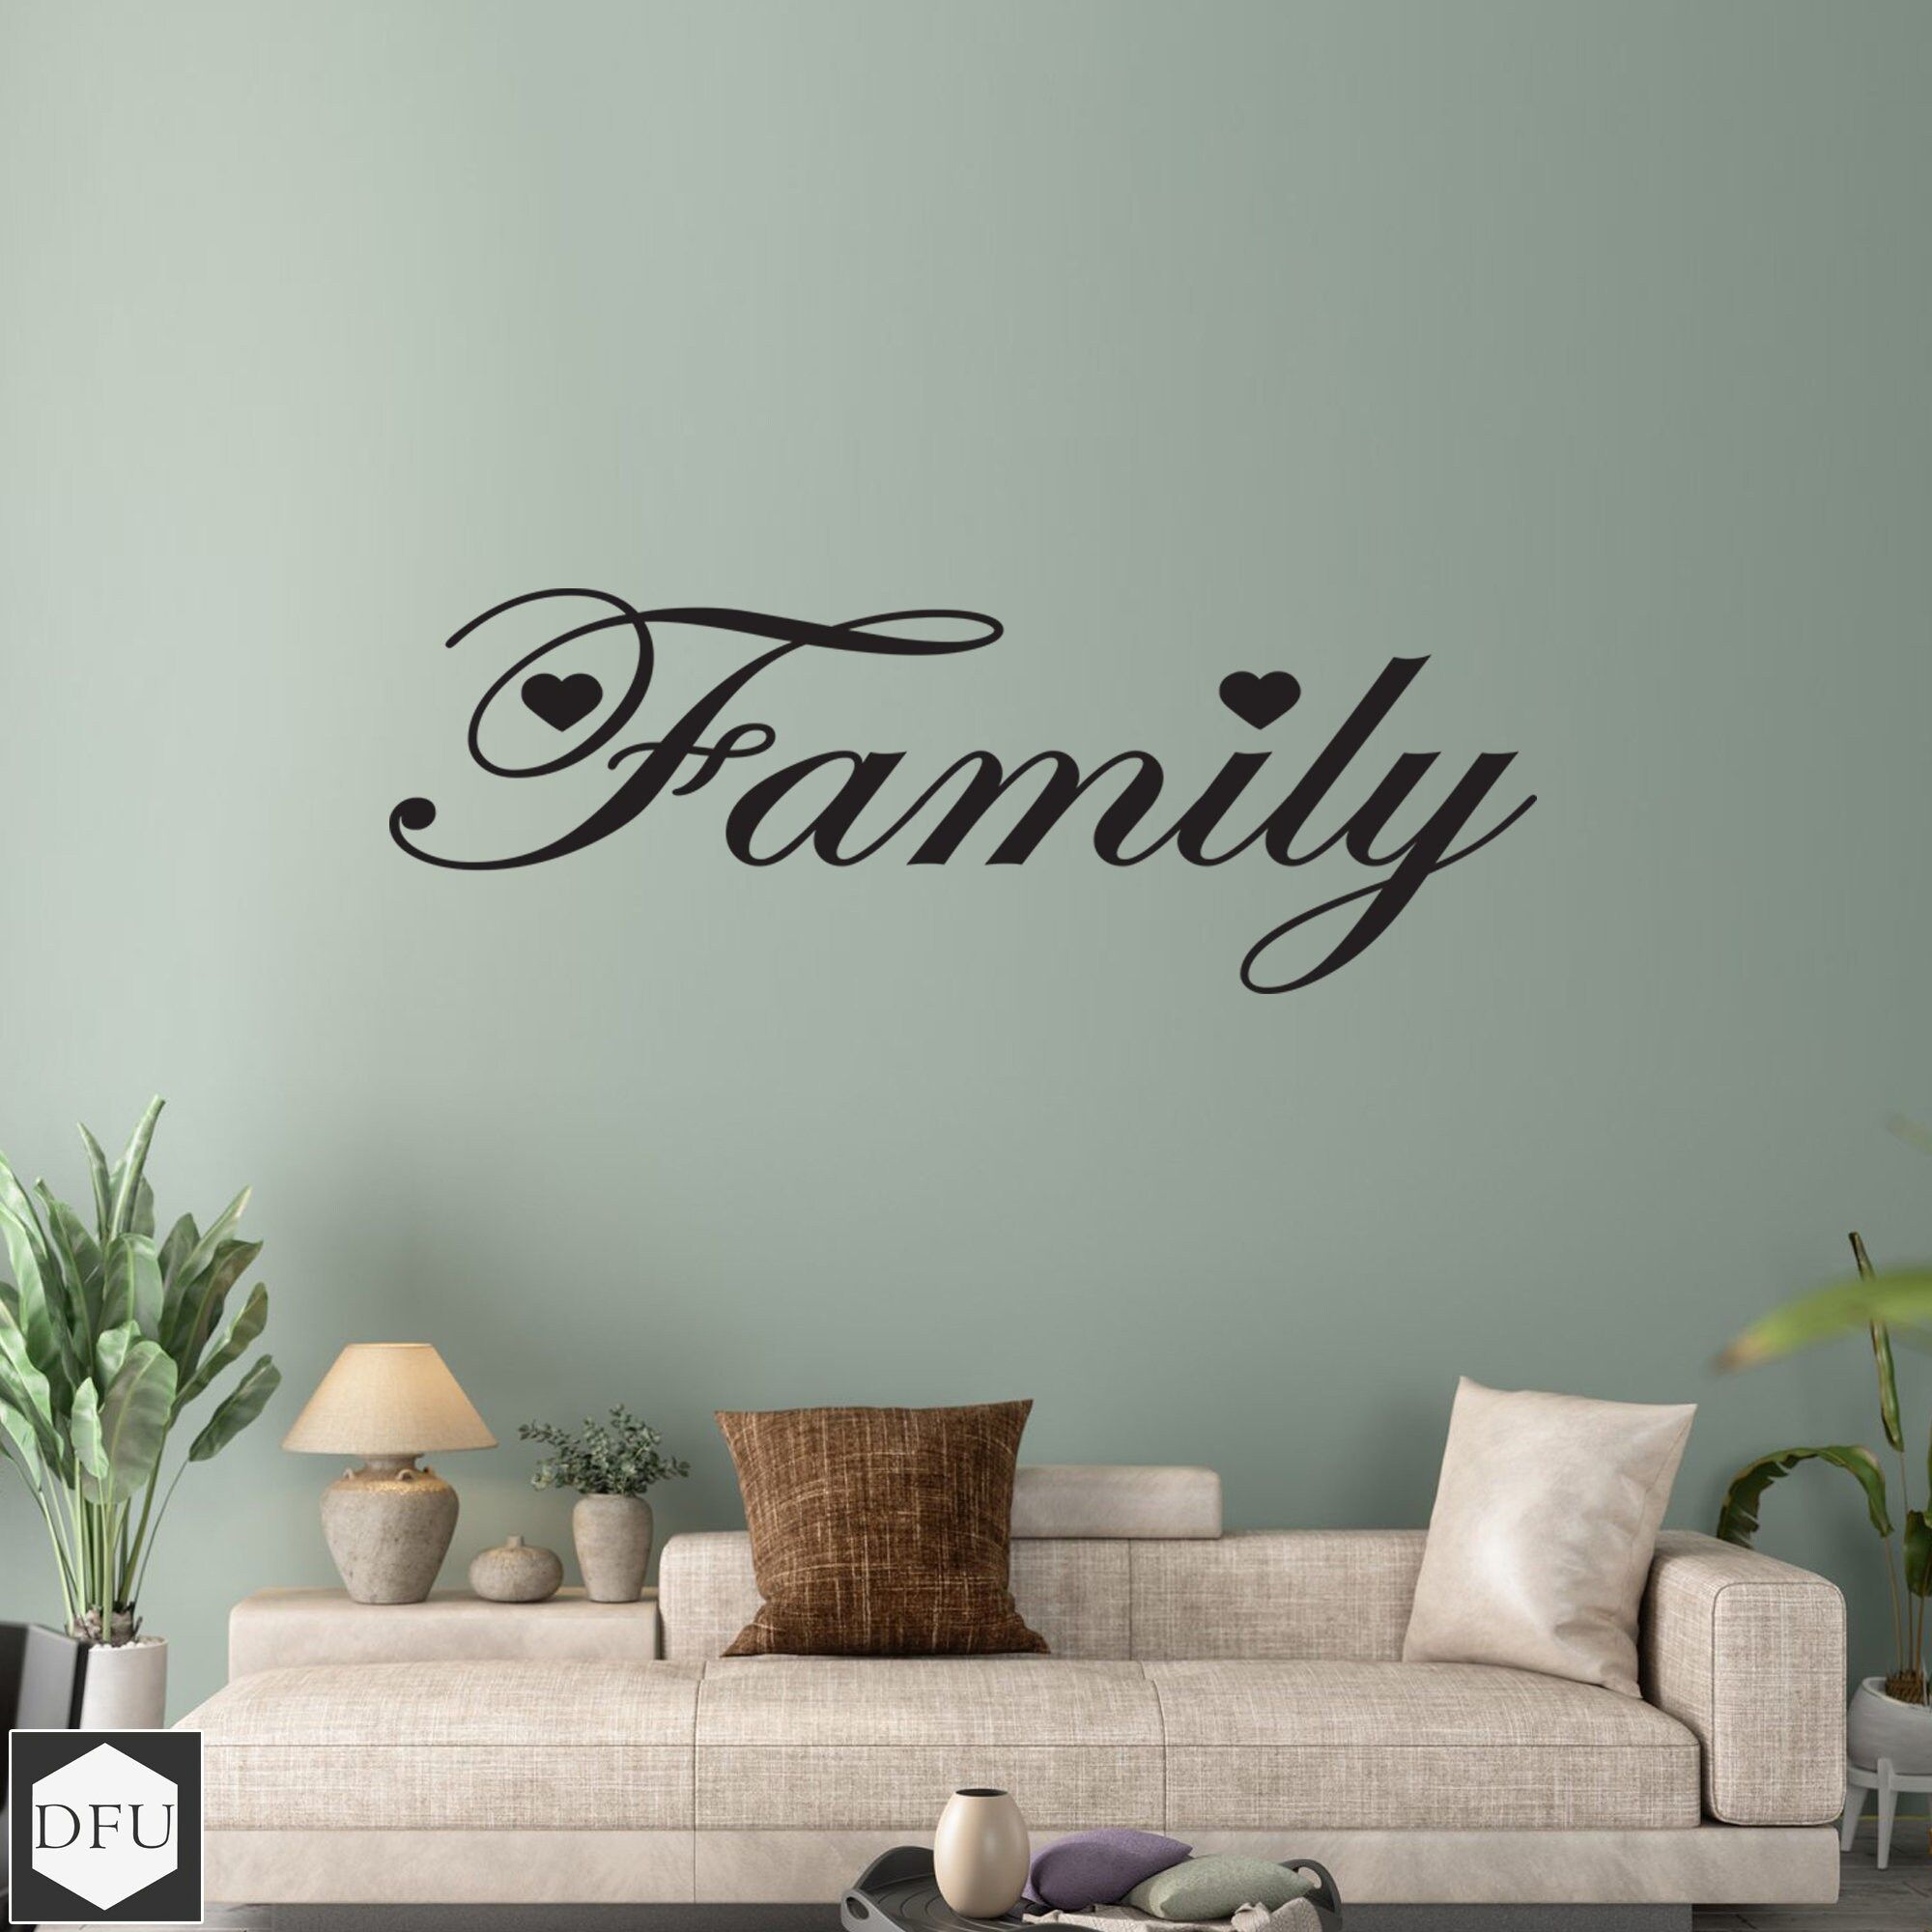 Family Word Wall Sticker Wall Art Decal Living Room – Etsy For Family Word Wall Art (View 5 of 15)